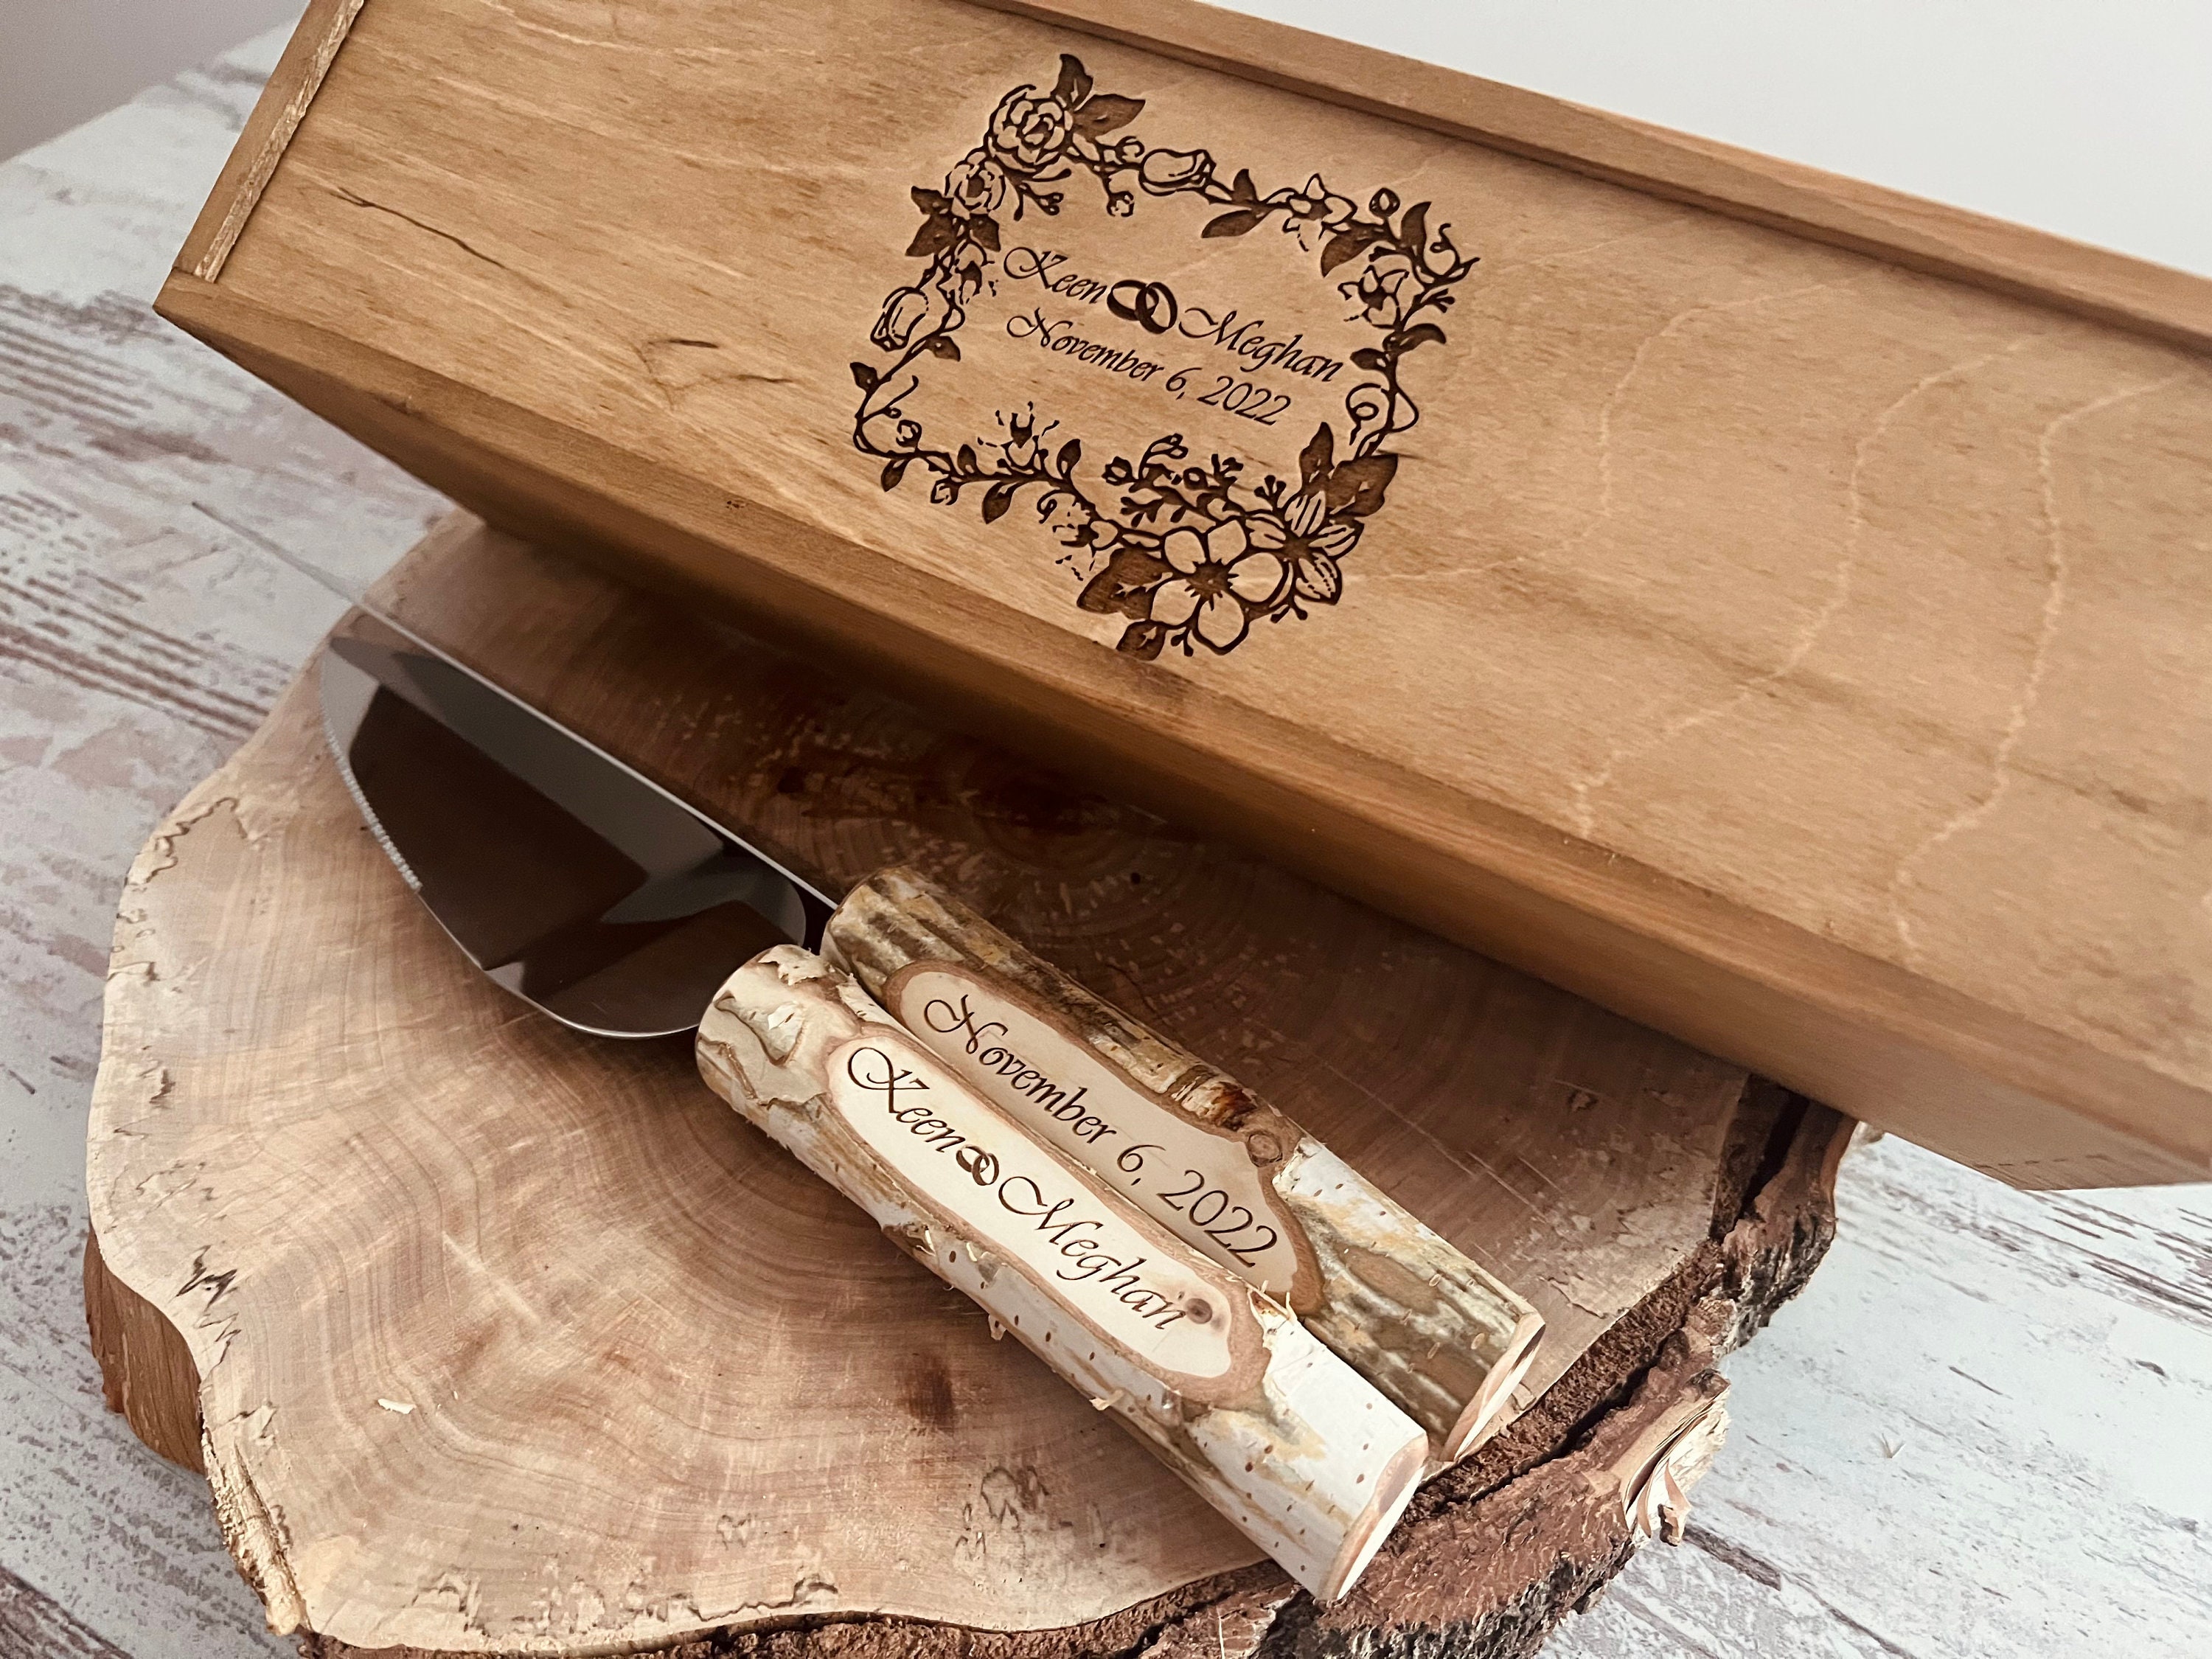 Handmade cake knife from oak wood is the best for cutting the soft,  delicate food Serving knife wooden knife decor Food Photography